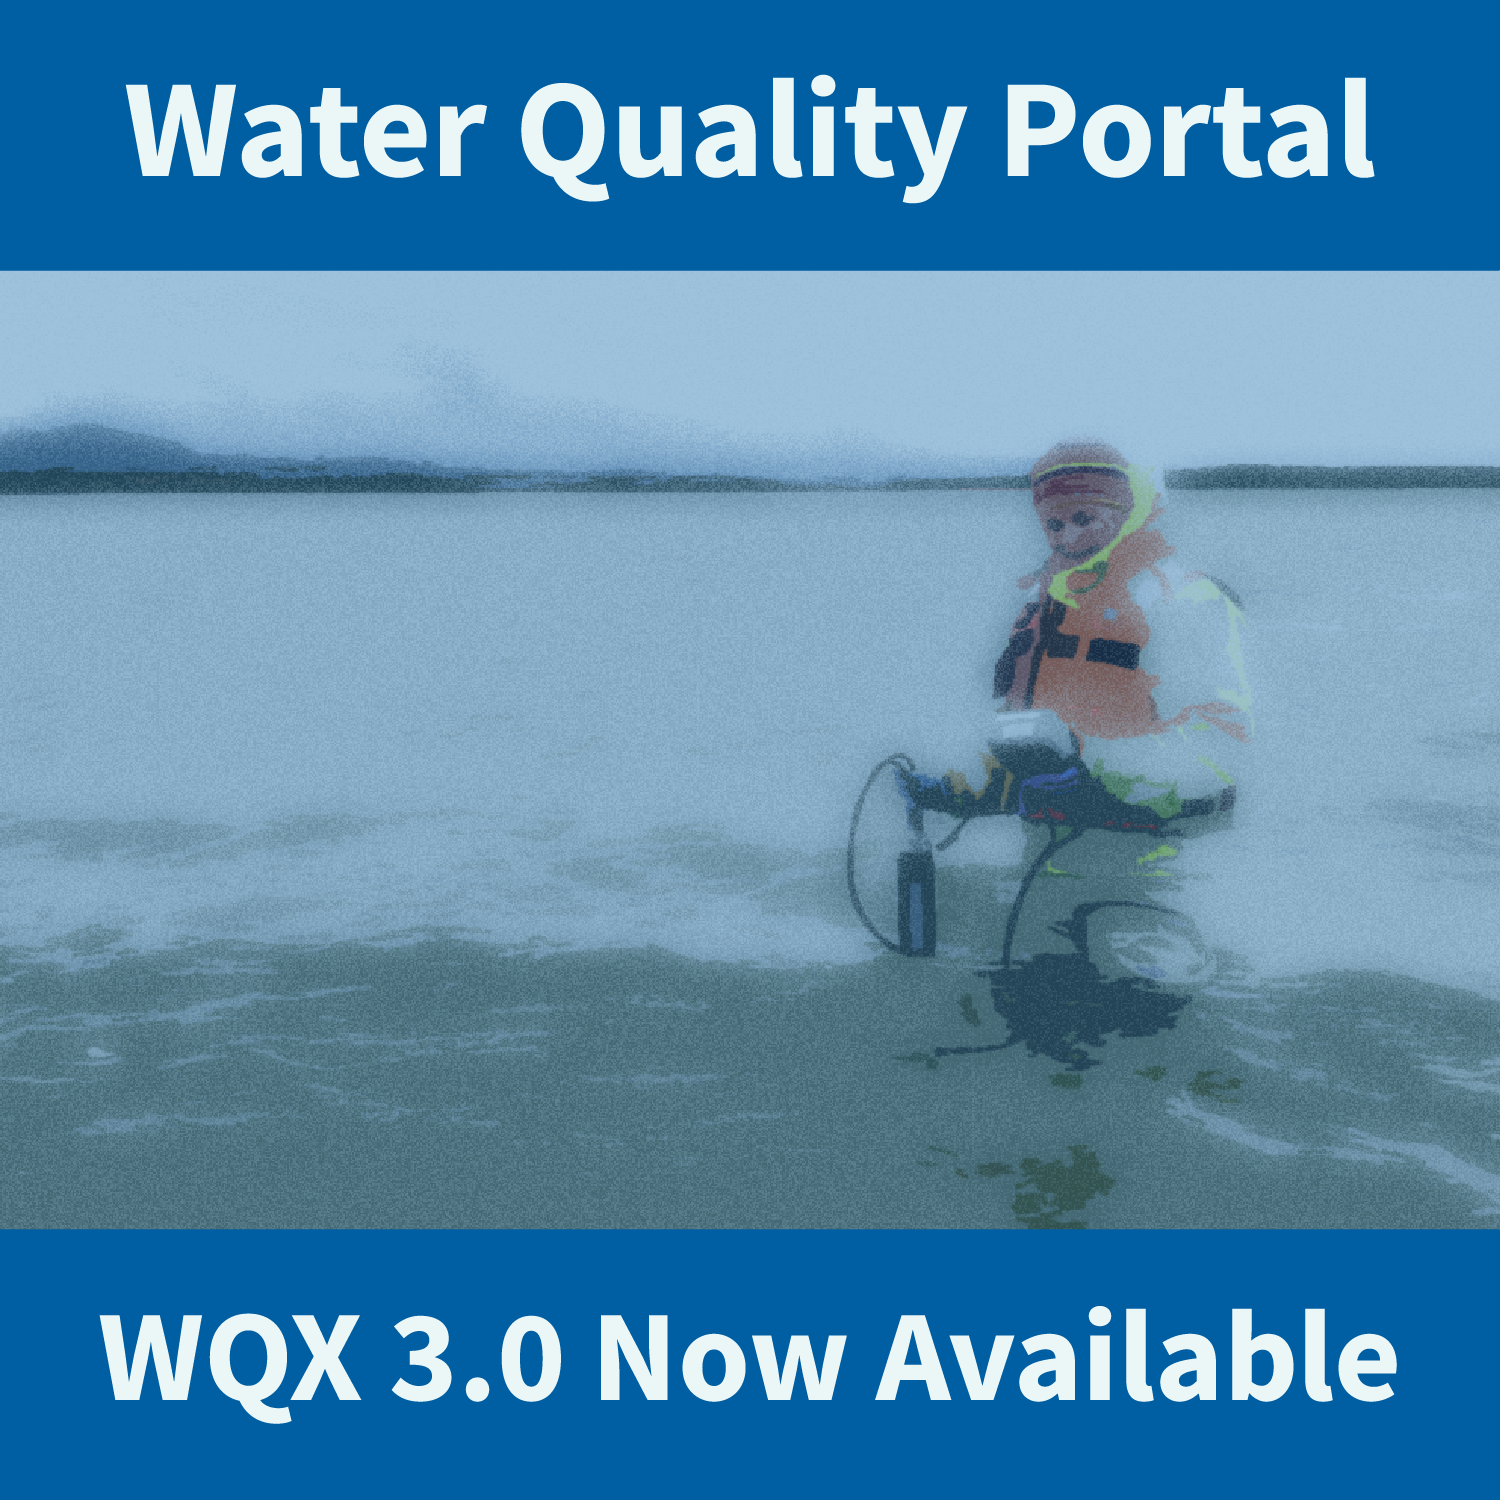 WQX3.0 Data Now Available on the Water Quality Portal